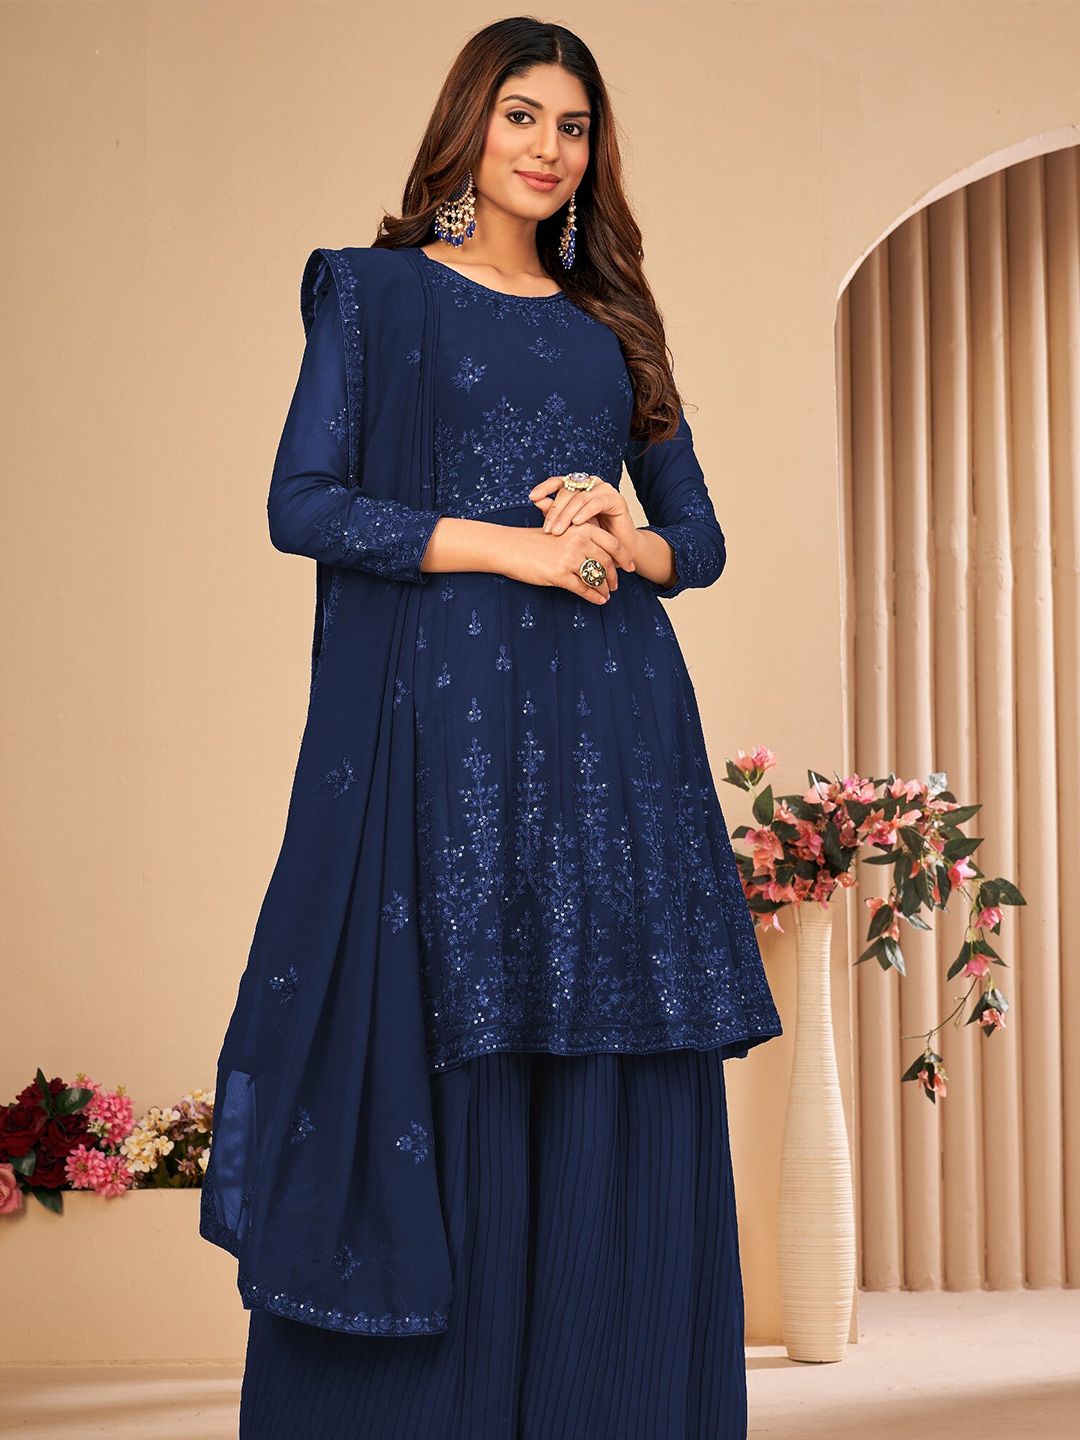 Divine International Trading Co Blue Embroidered Unstitched Dress Material Price in India